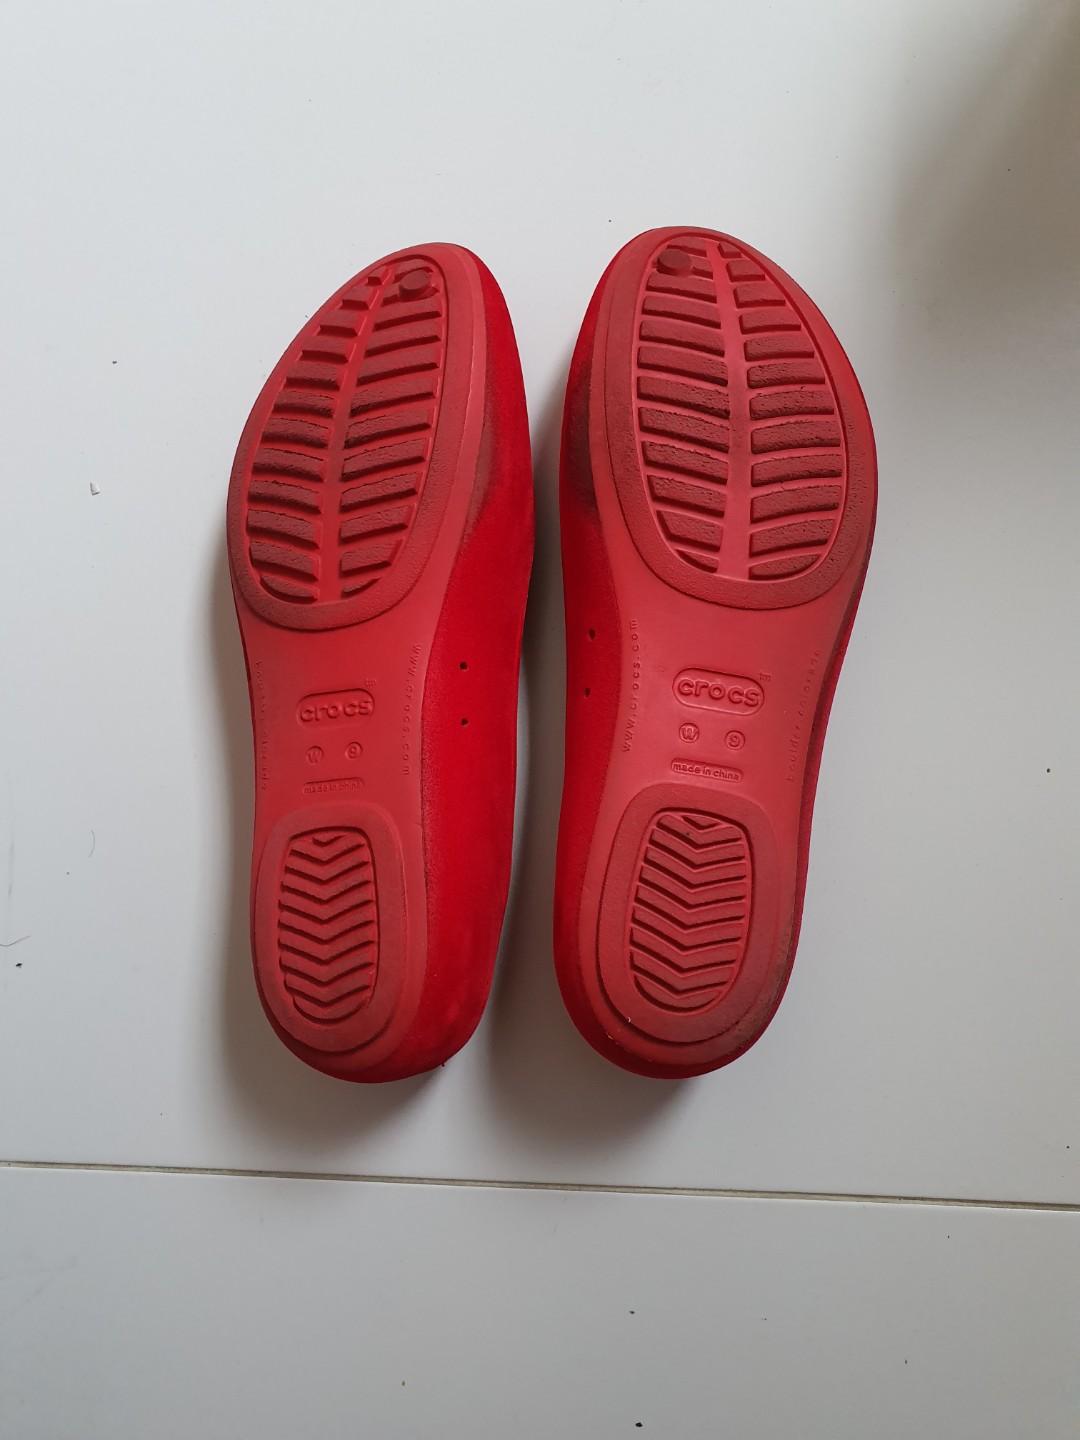 Preloved Crocs red Shoes, Women's 